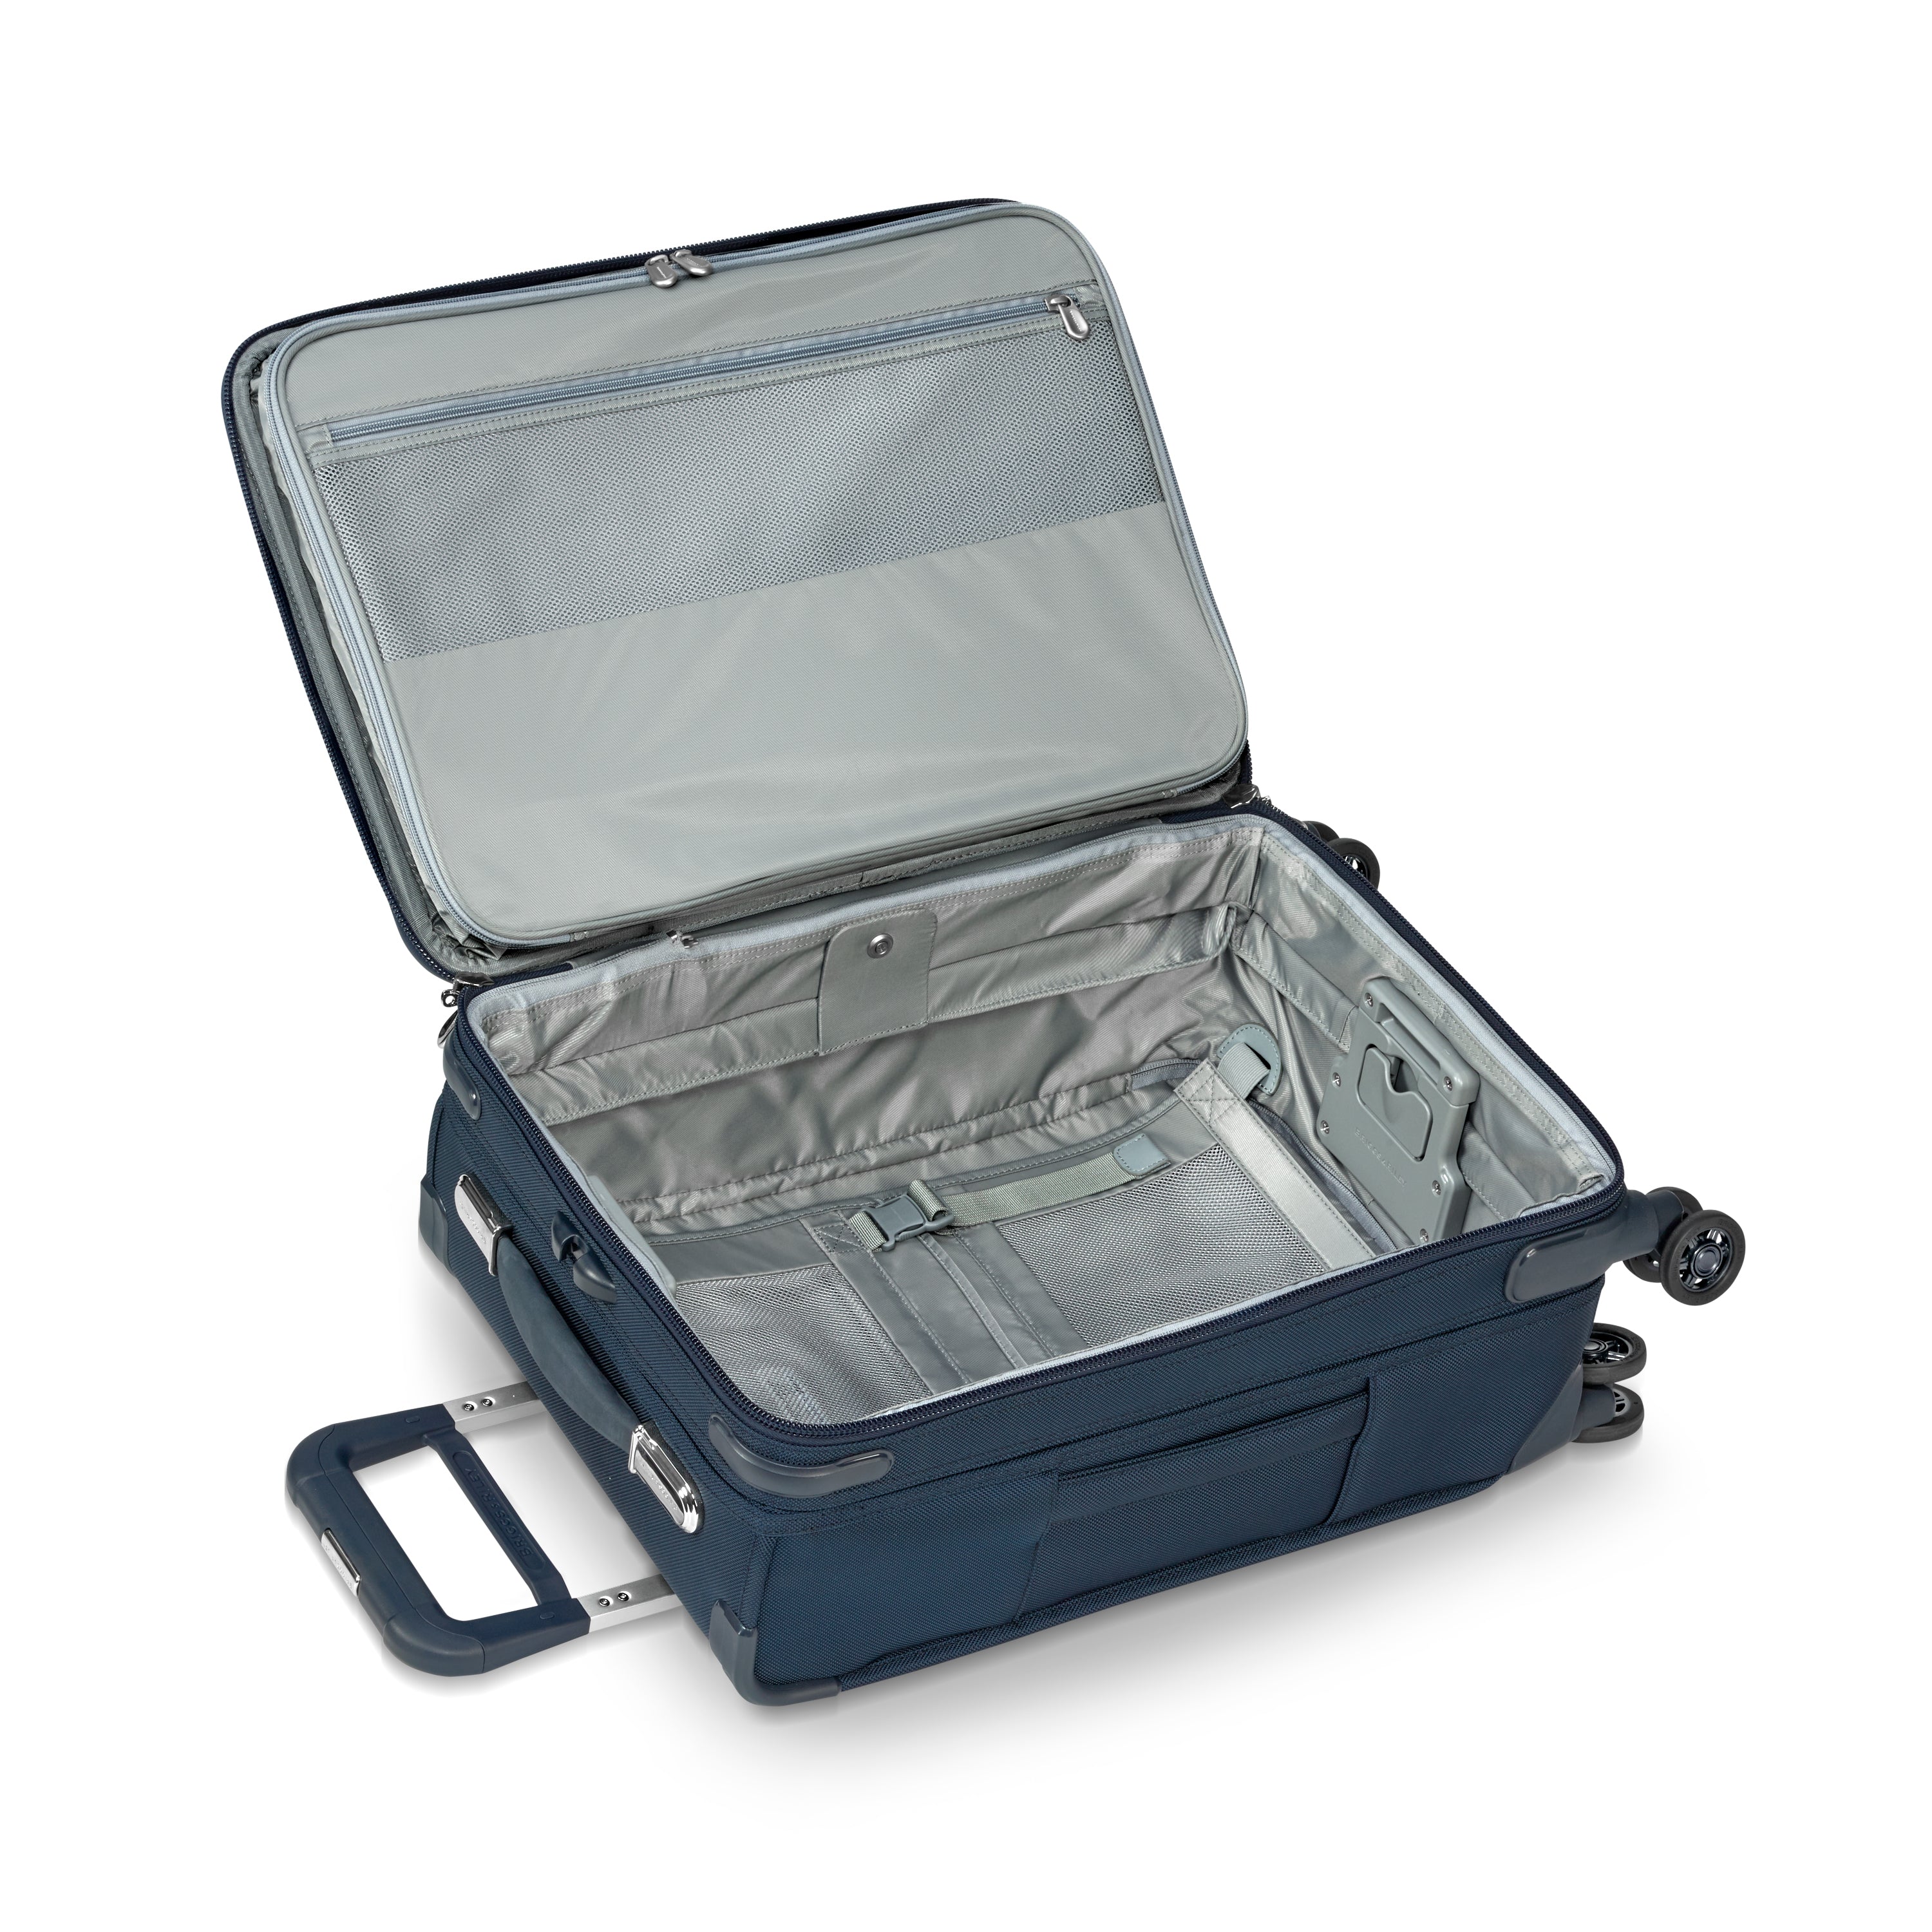 Briggs & Riley Baseline 22" Domestic Carry-On Expandable Spinner - Navy Blue | MEGO